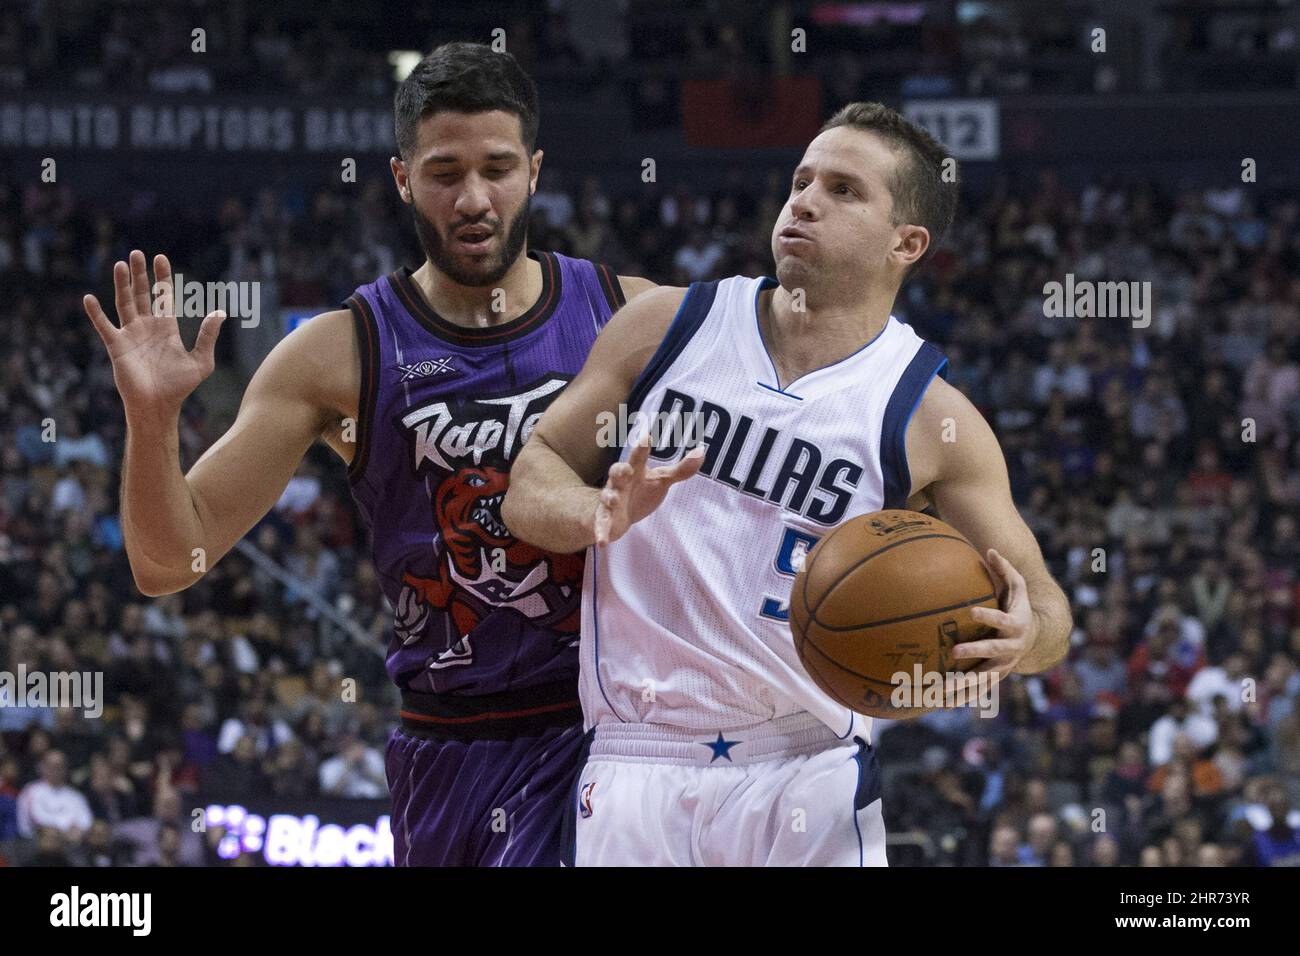 Toronto Raptors' Greivis Vasquez smiles from the bench against the  Philadelphia 76ers during the second half of an NBA basketball game in  Toronto on Friday, Dec. 13, 2013. (AP Photo/The Canadian Press